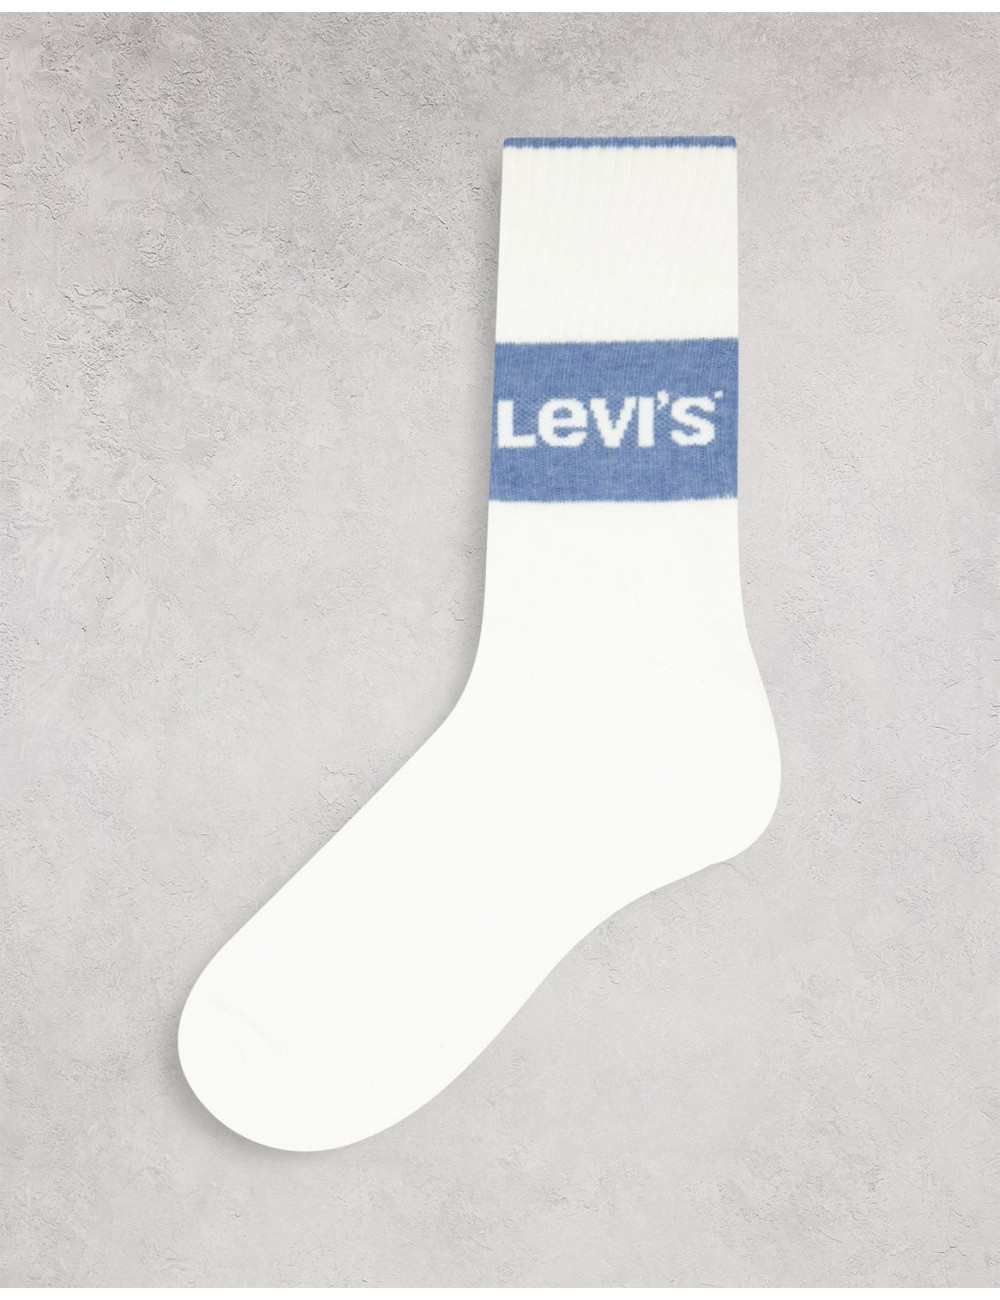 Levi's 2 pack sustainable...